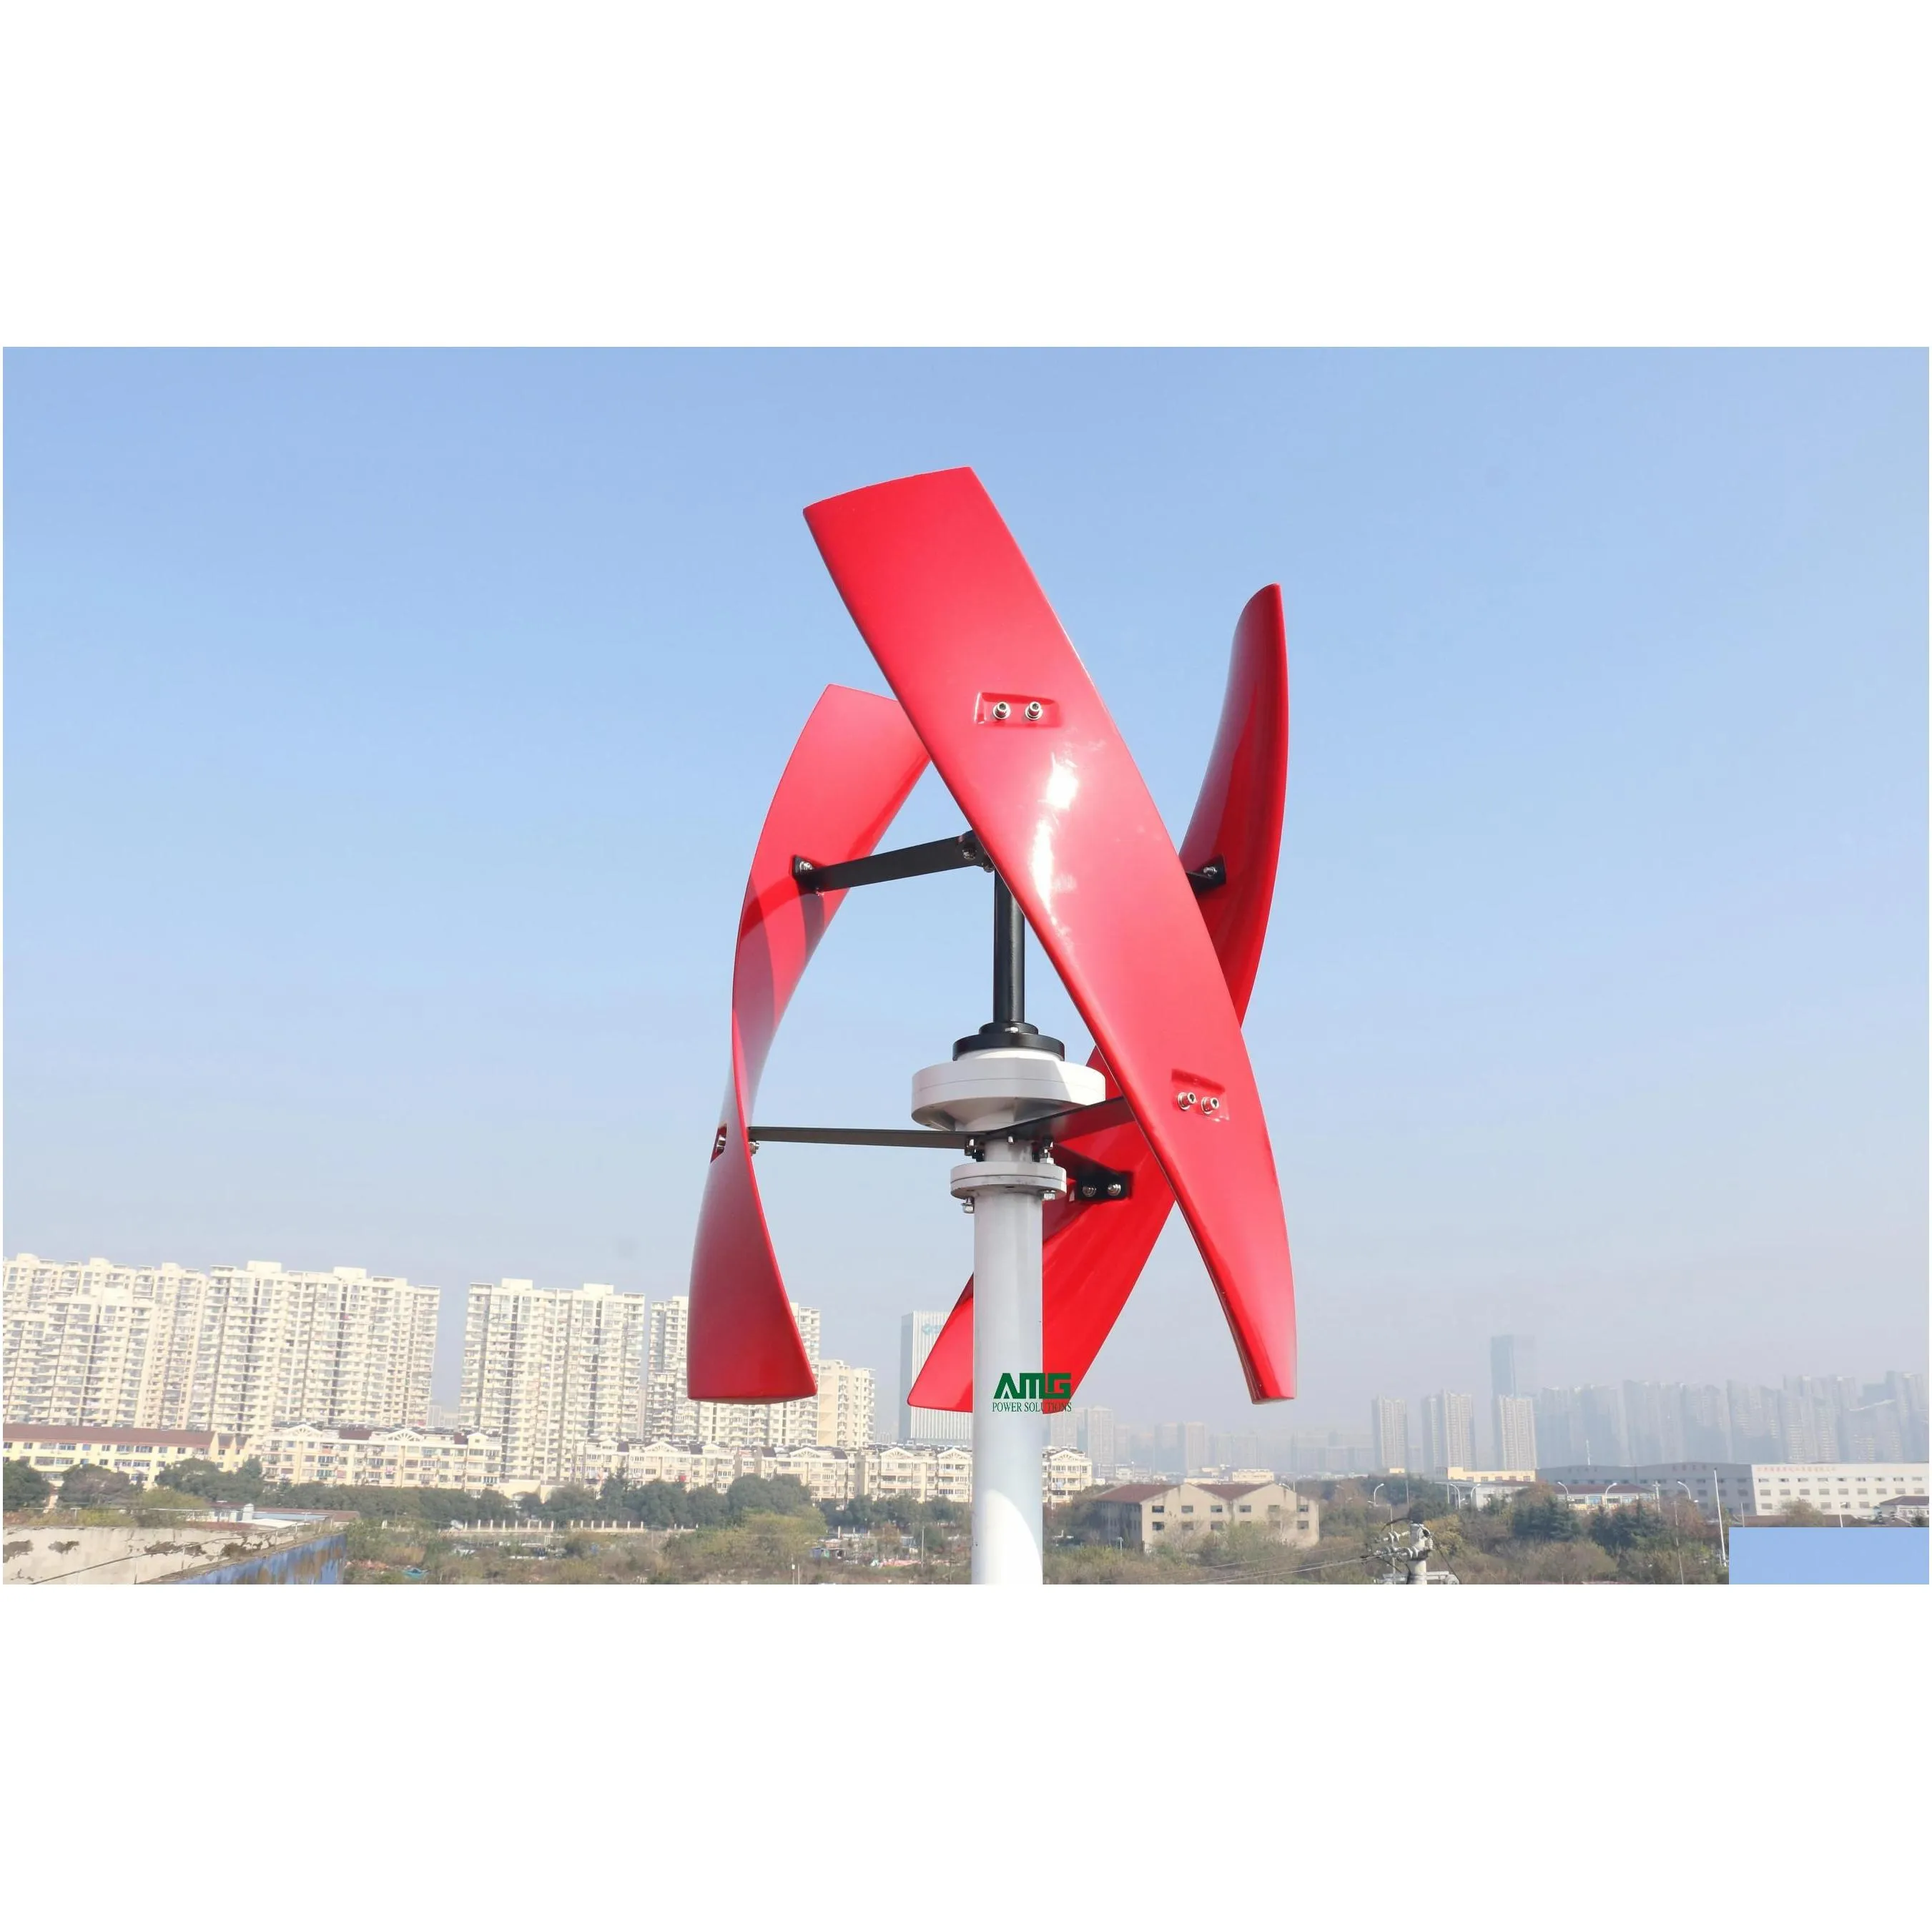 600w 12v spiral wind turbine generator red/white vawt vertical axis residential energy with economical pwm  controller